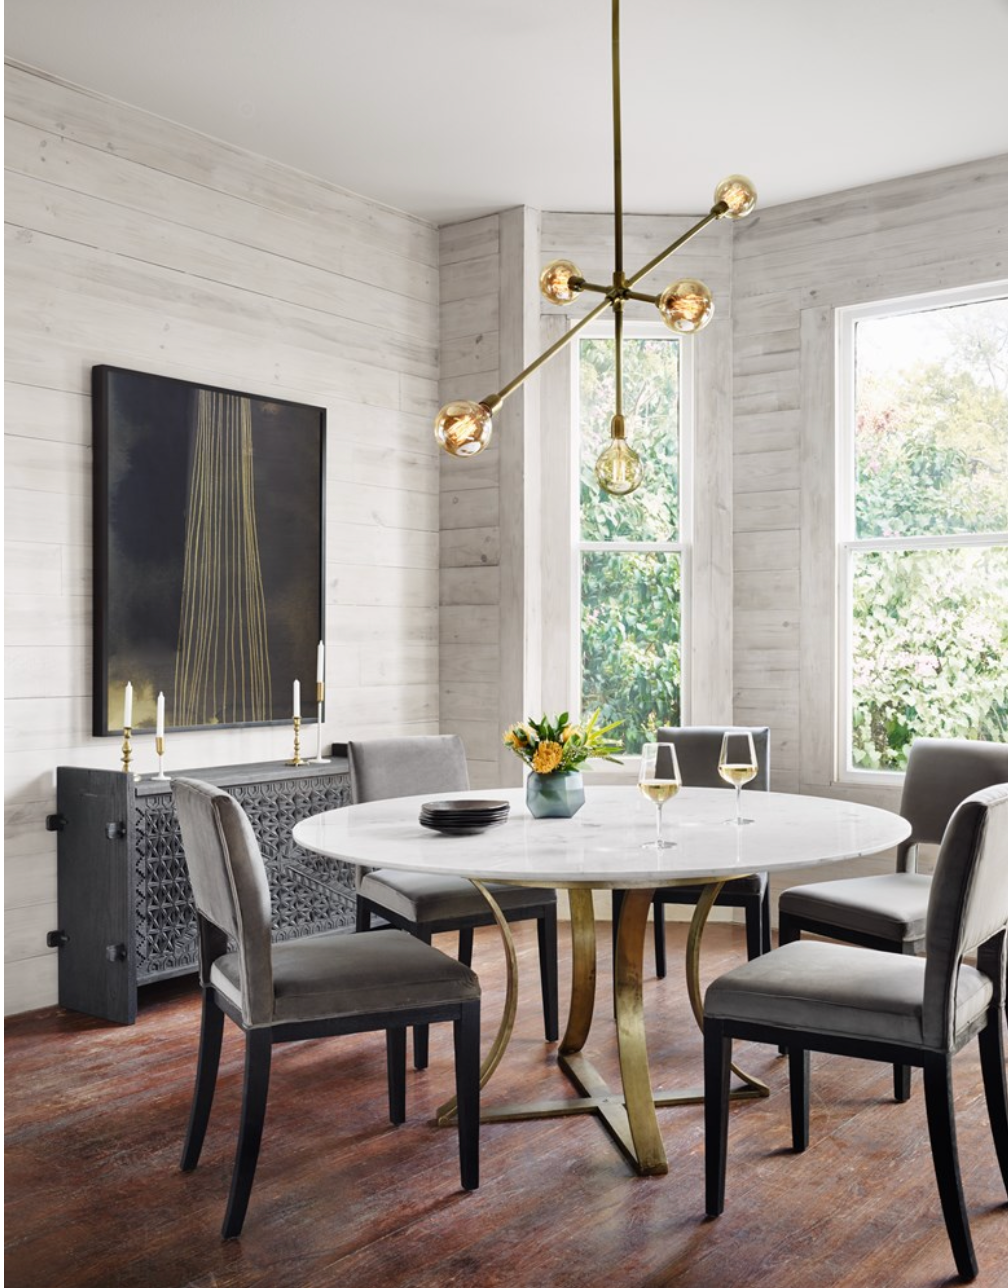 Julian 60" Round Dining Table - White Marble + Antique Brass